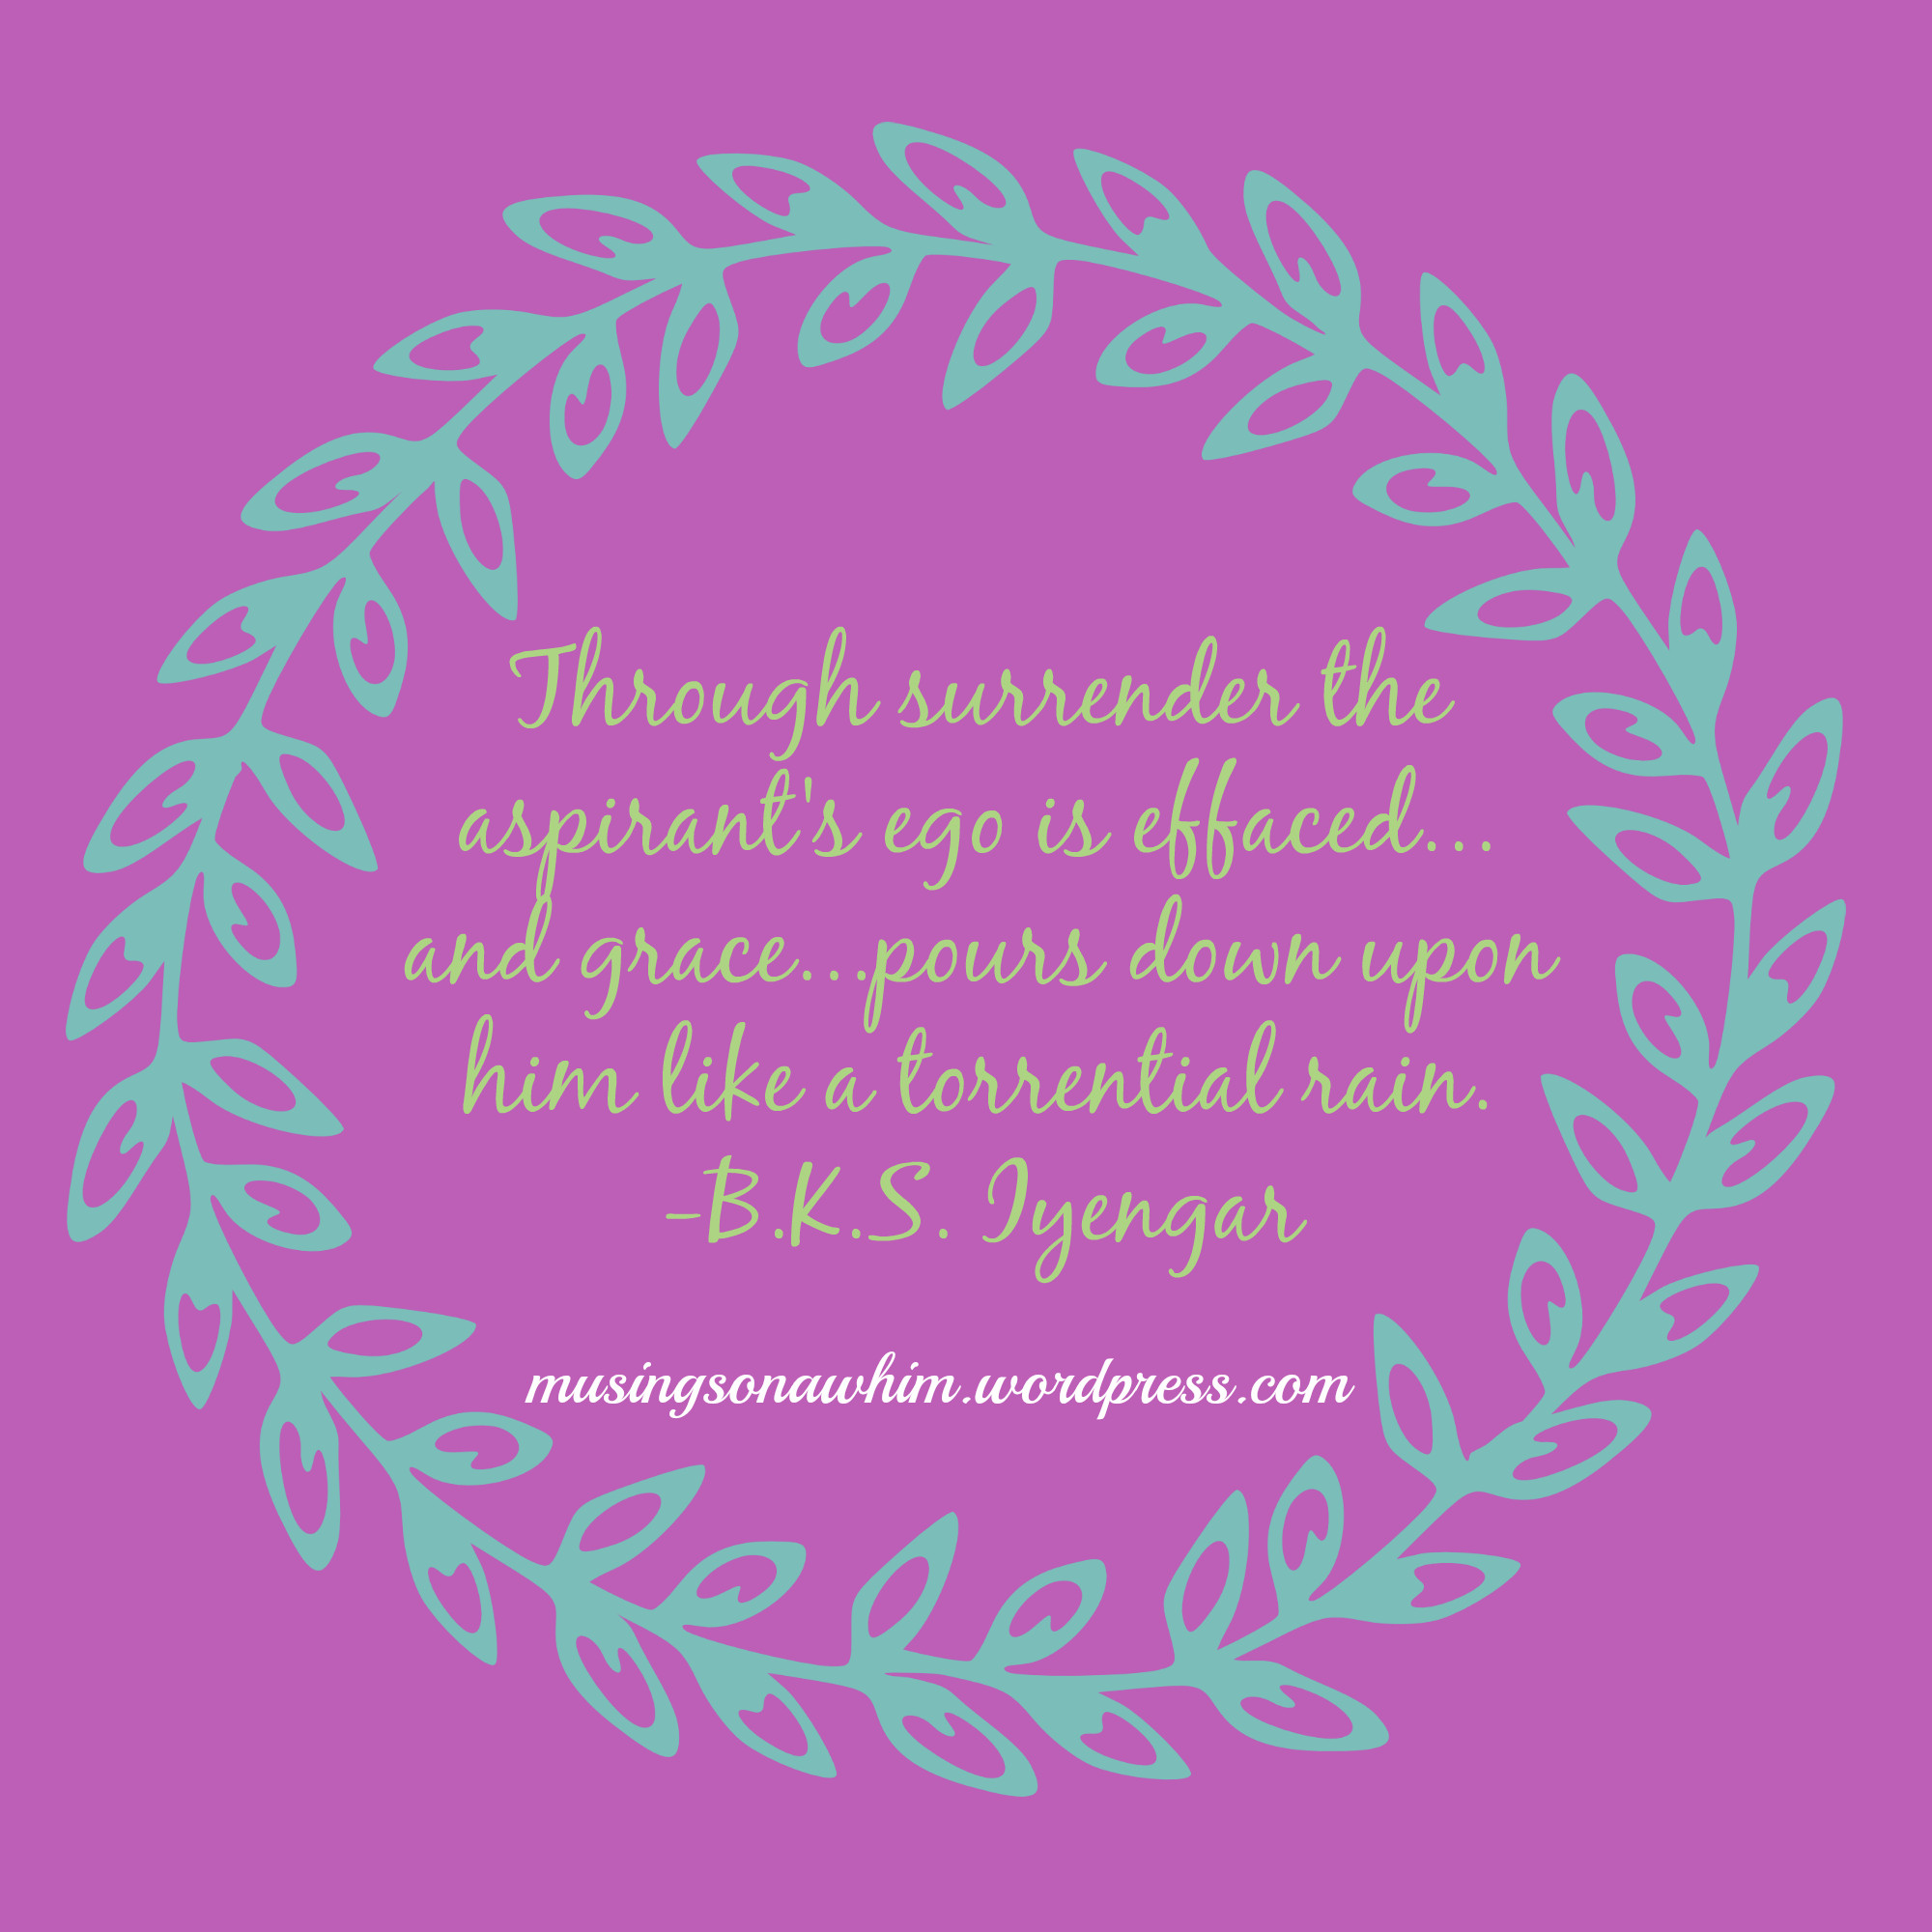 B K S Iyengar Quotes Light On Life
 Losing Control – Practicing the Art of Surrender – Musings